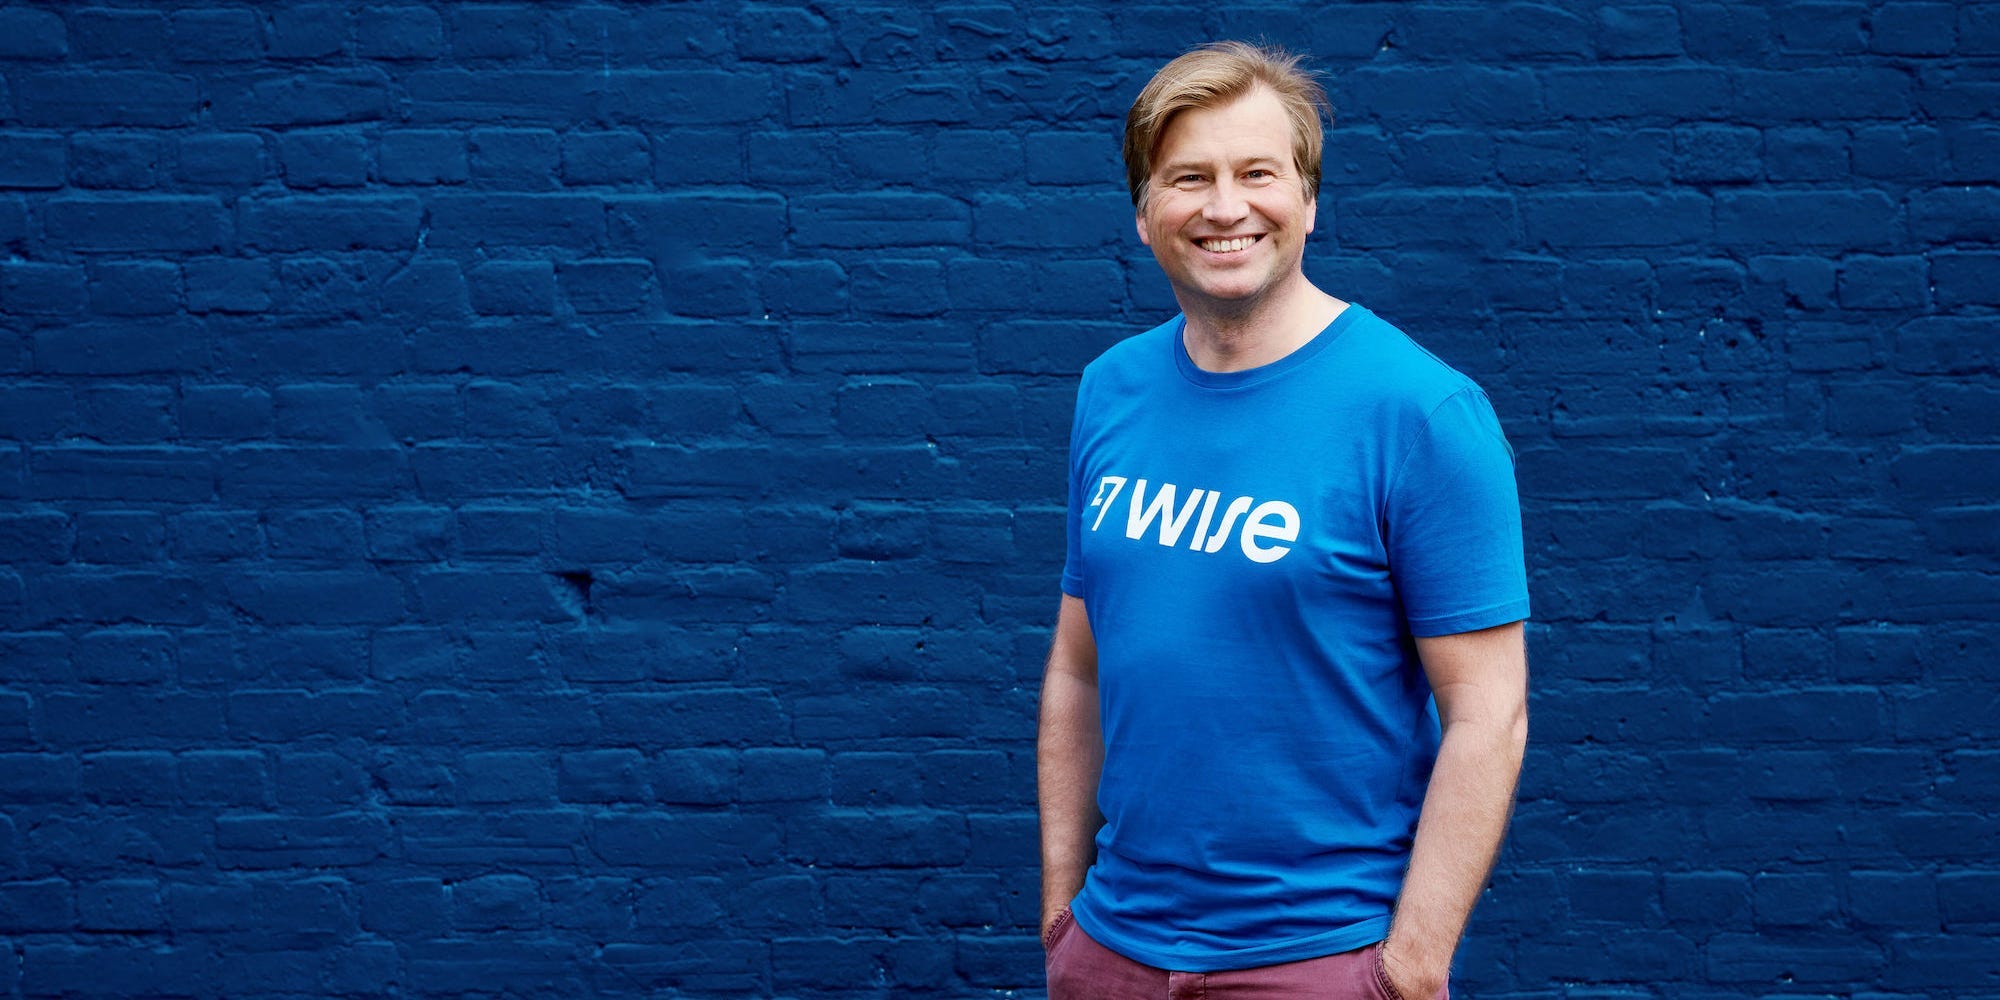 Kristo Kaarmann, CEO and cofounder of Wise.